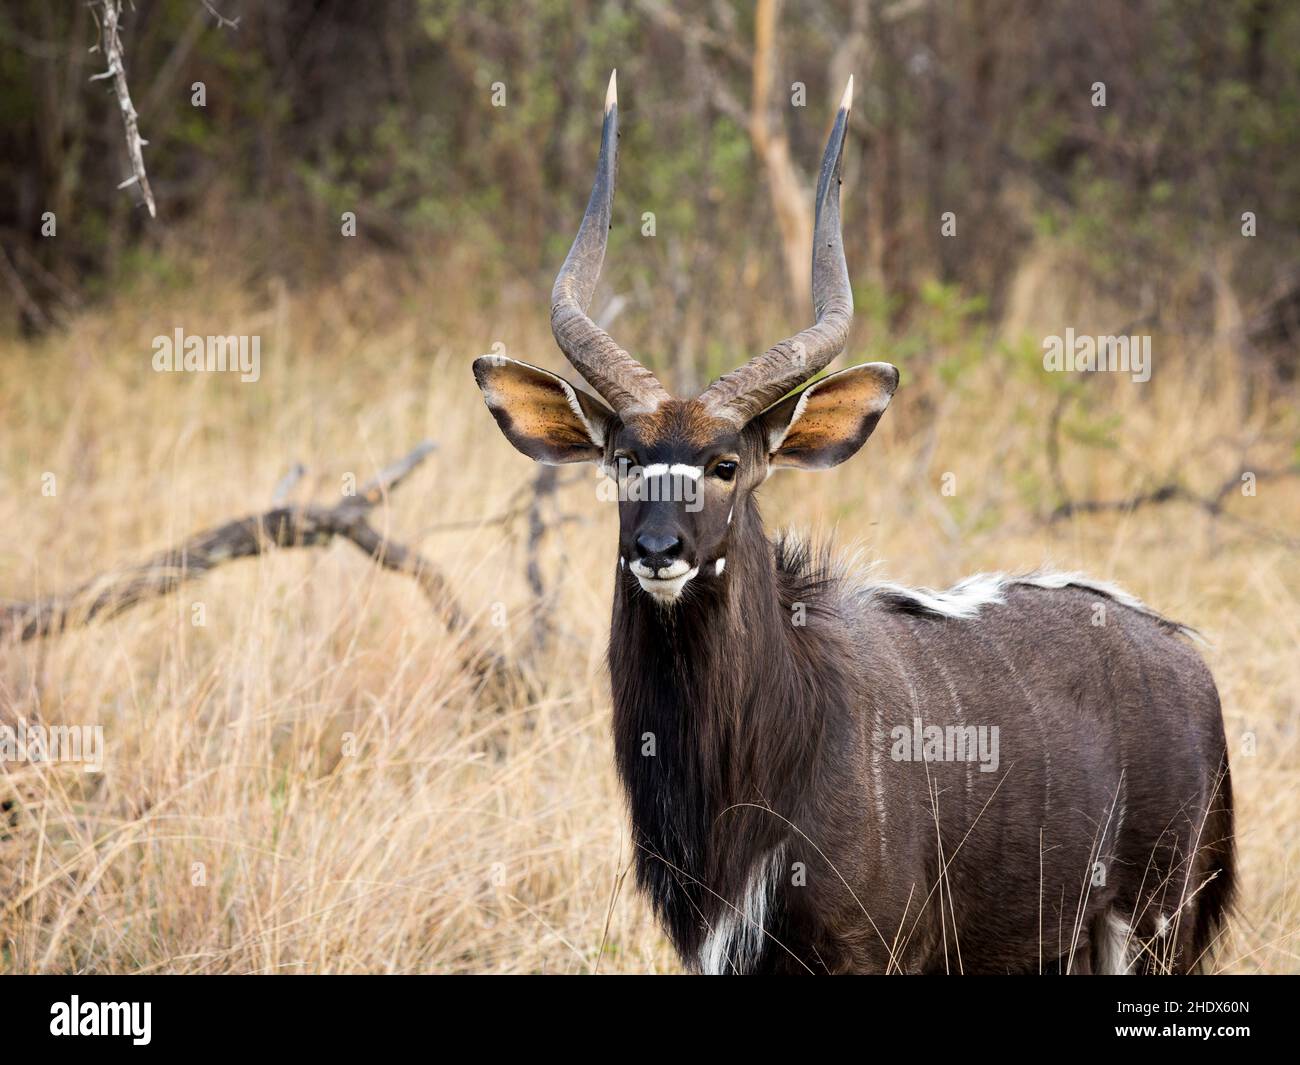 A close-up of a Nyala (Tragelaphus angasii) antelope standing in the tall grass looking at the camera with its long hair, dark brown coat and long hor Stock Photo